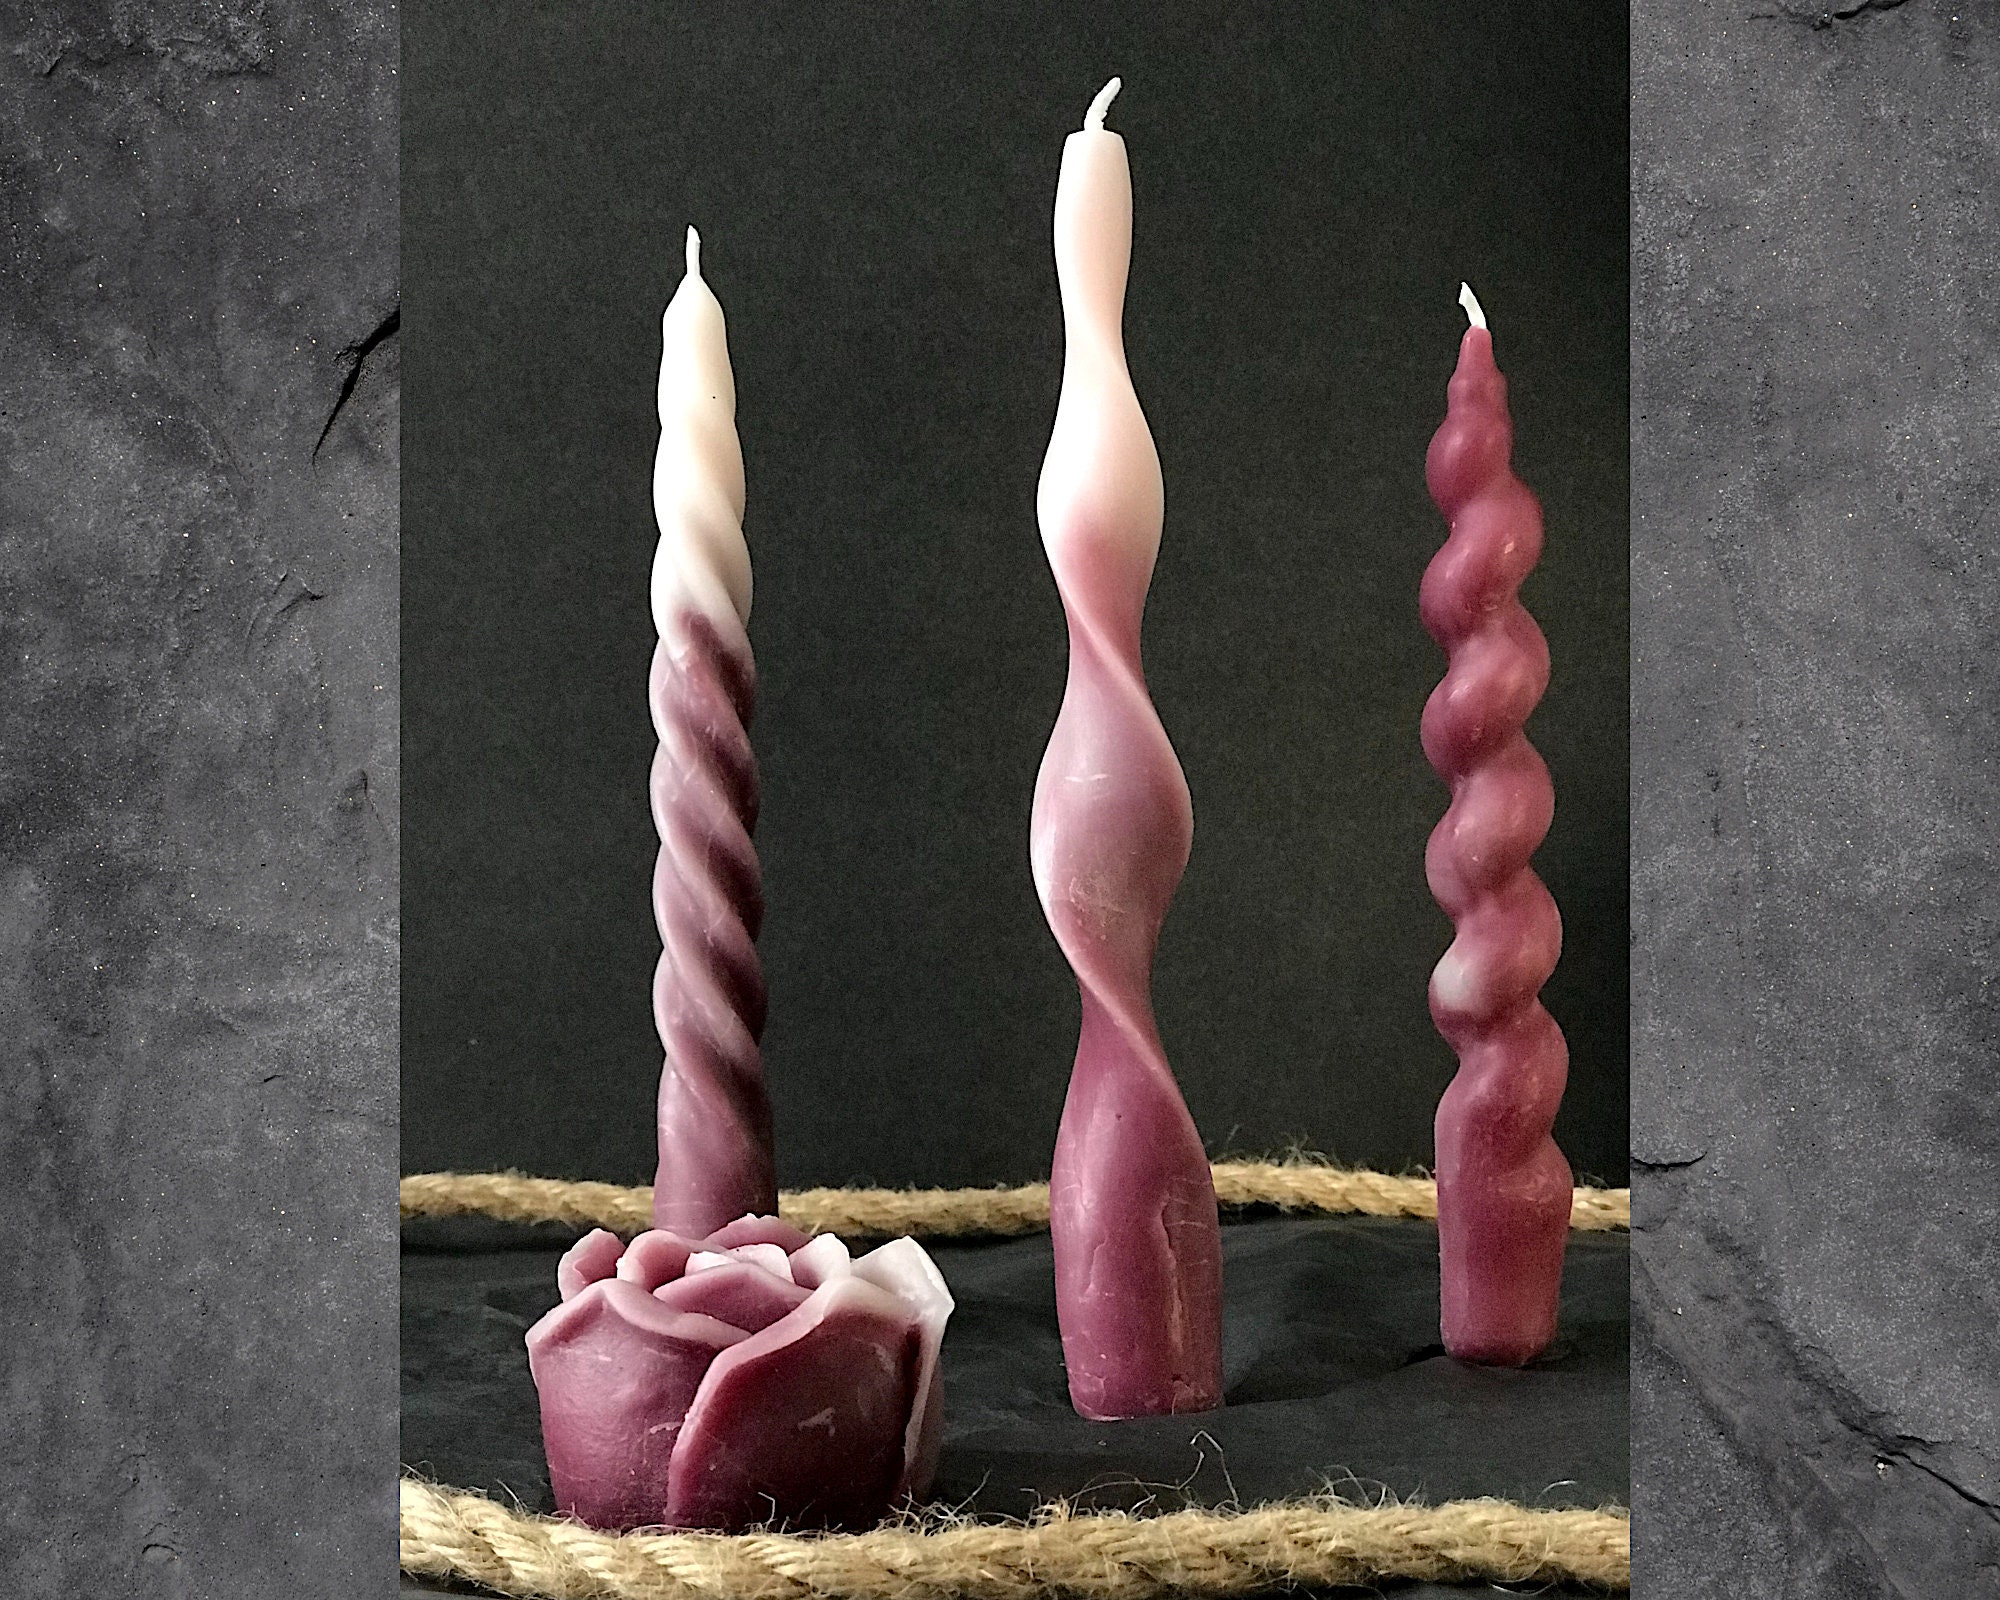 Ruffles Spiral Beeswax Taper Candles - 7/8 x 12 - Pair - Crafted